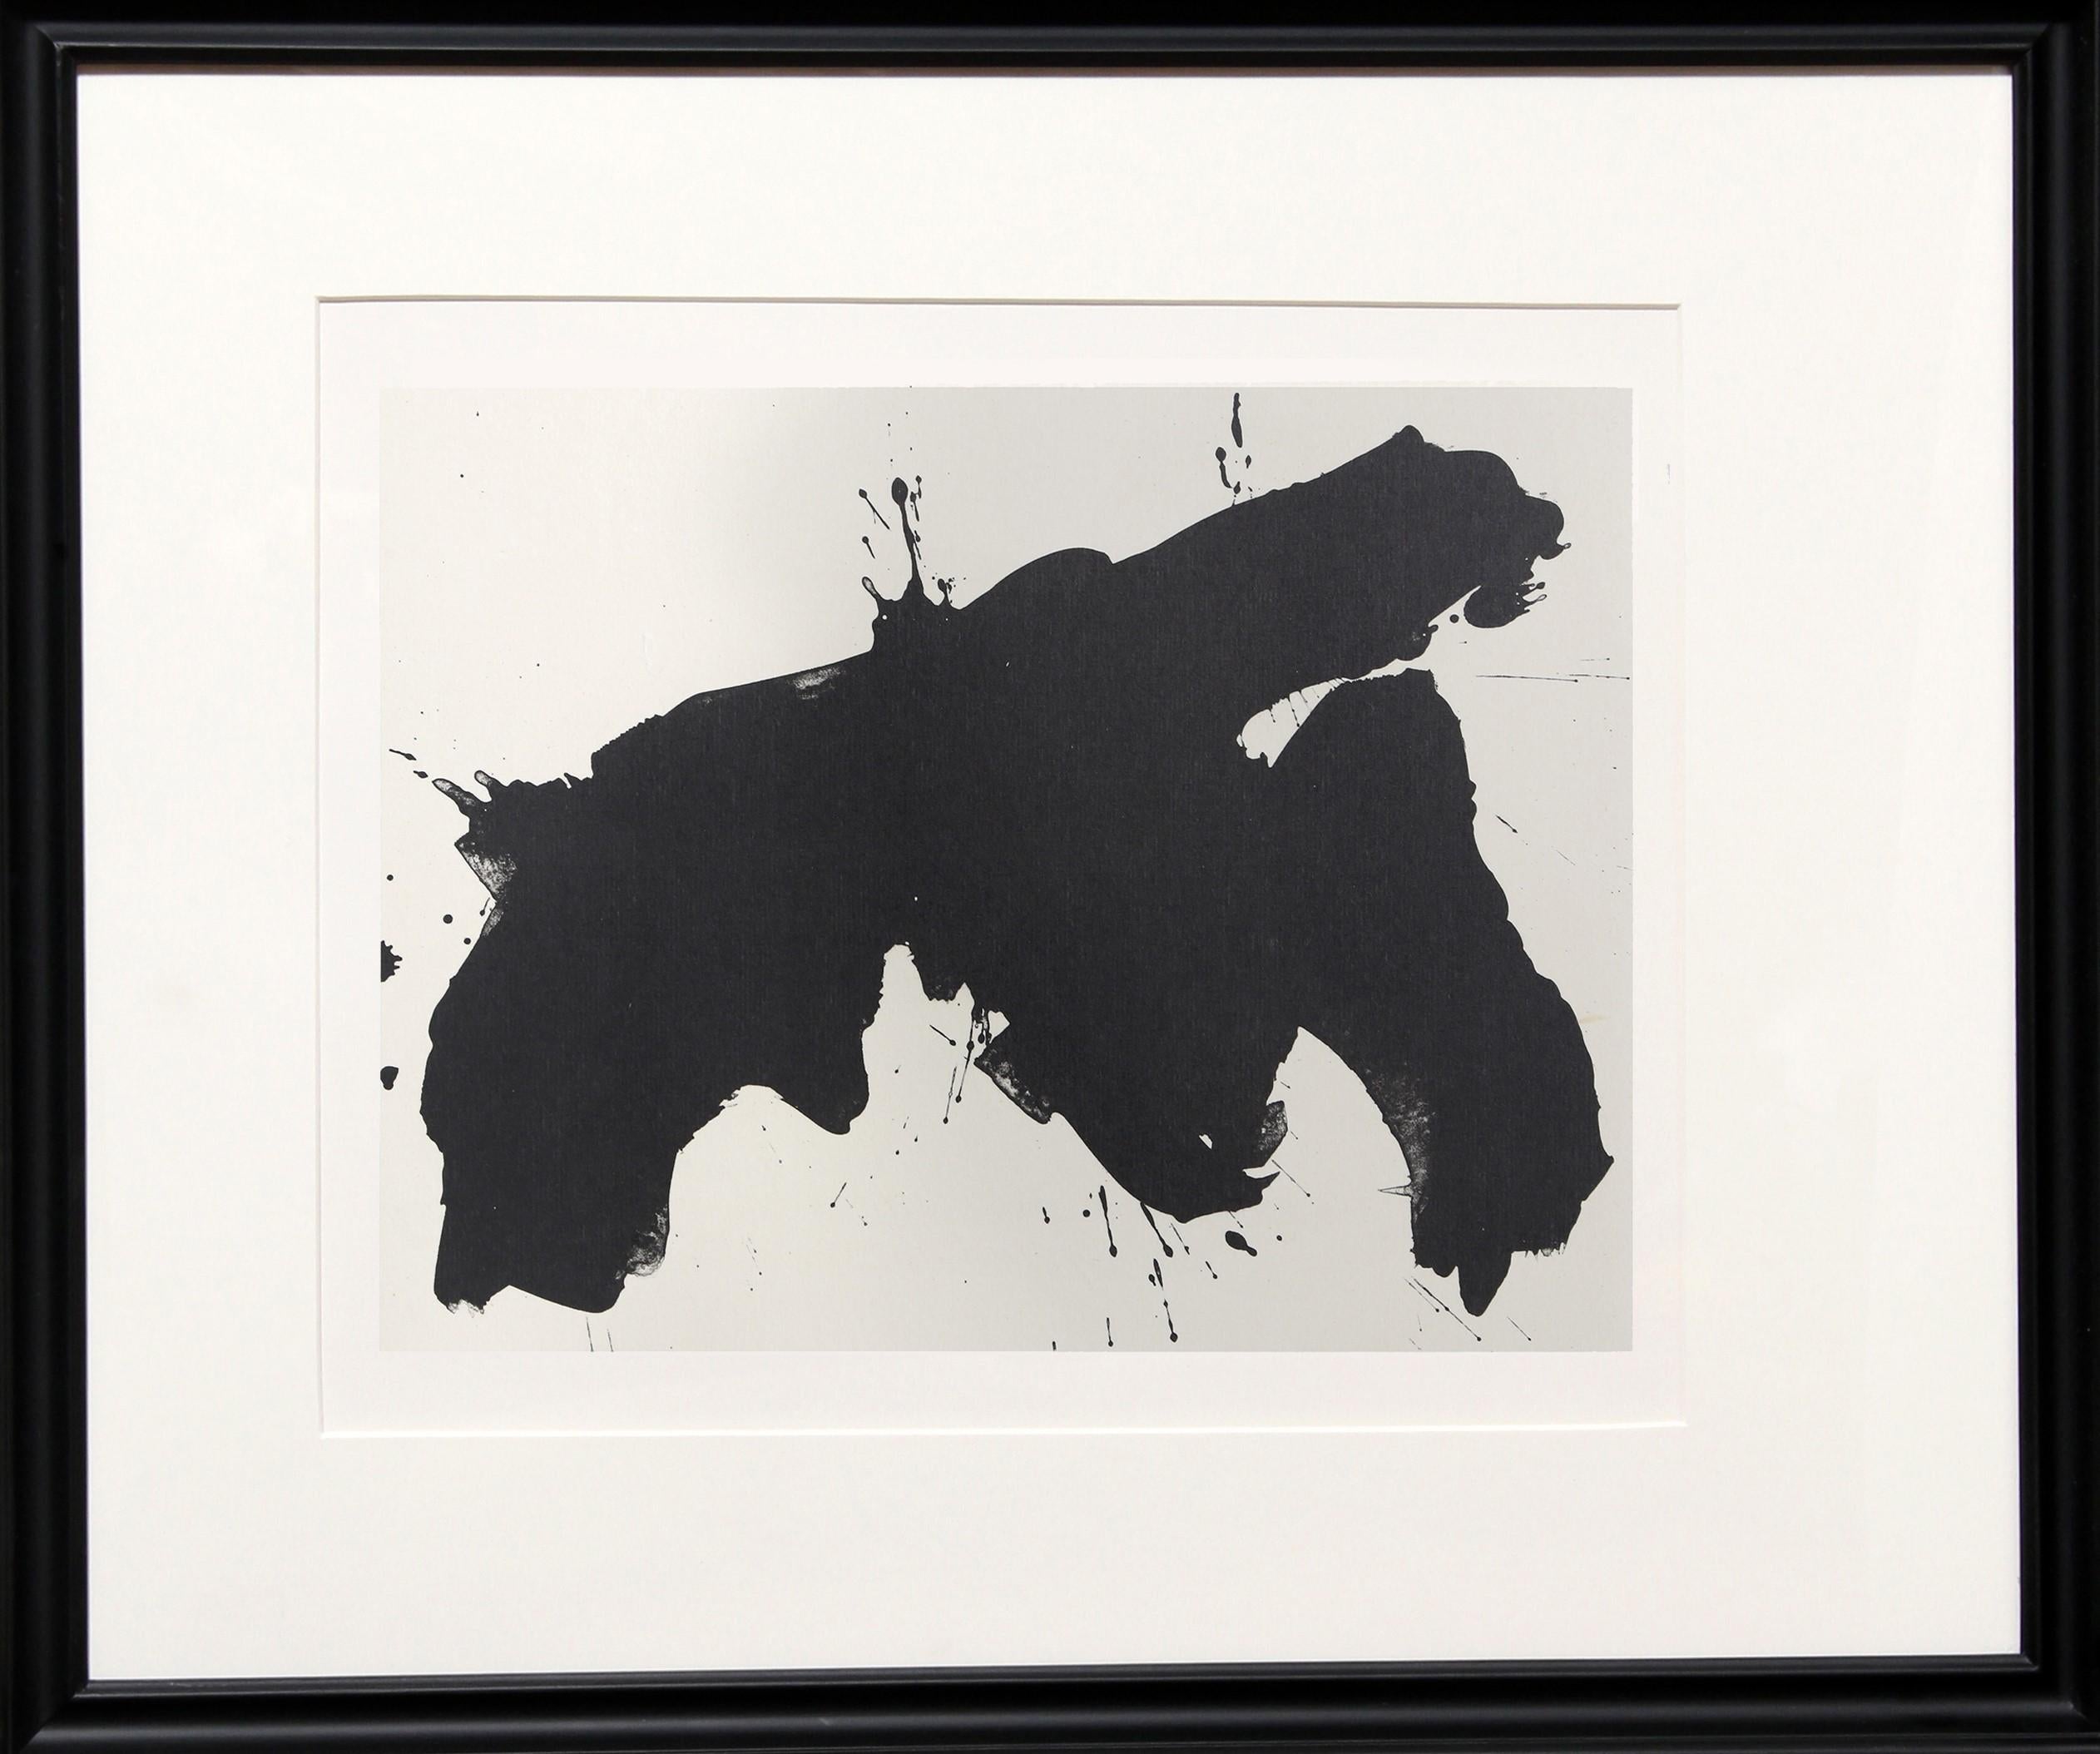 Artist: Robert Motherwell, American (1915 - 1991)
Title: No. 19 from Three Poems, collaboration with Octavio Paz
Year: 1987
Medium:	Lithograph on Japon with Chine Colle
Edition: 750
Image Size: 14 x 10.5 inches
Paper Size: 21 x 16 inches
Frame Size: